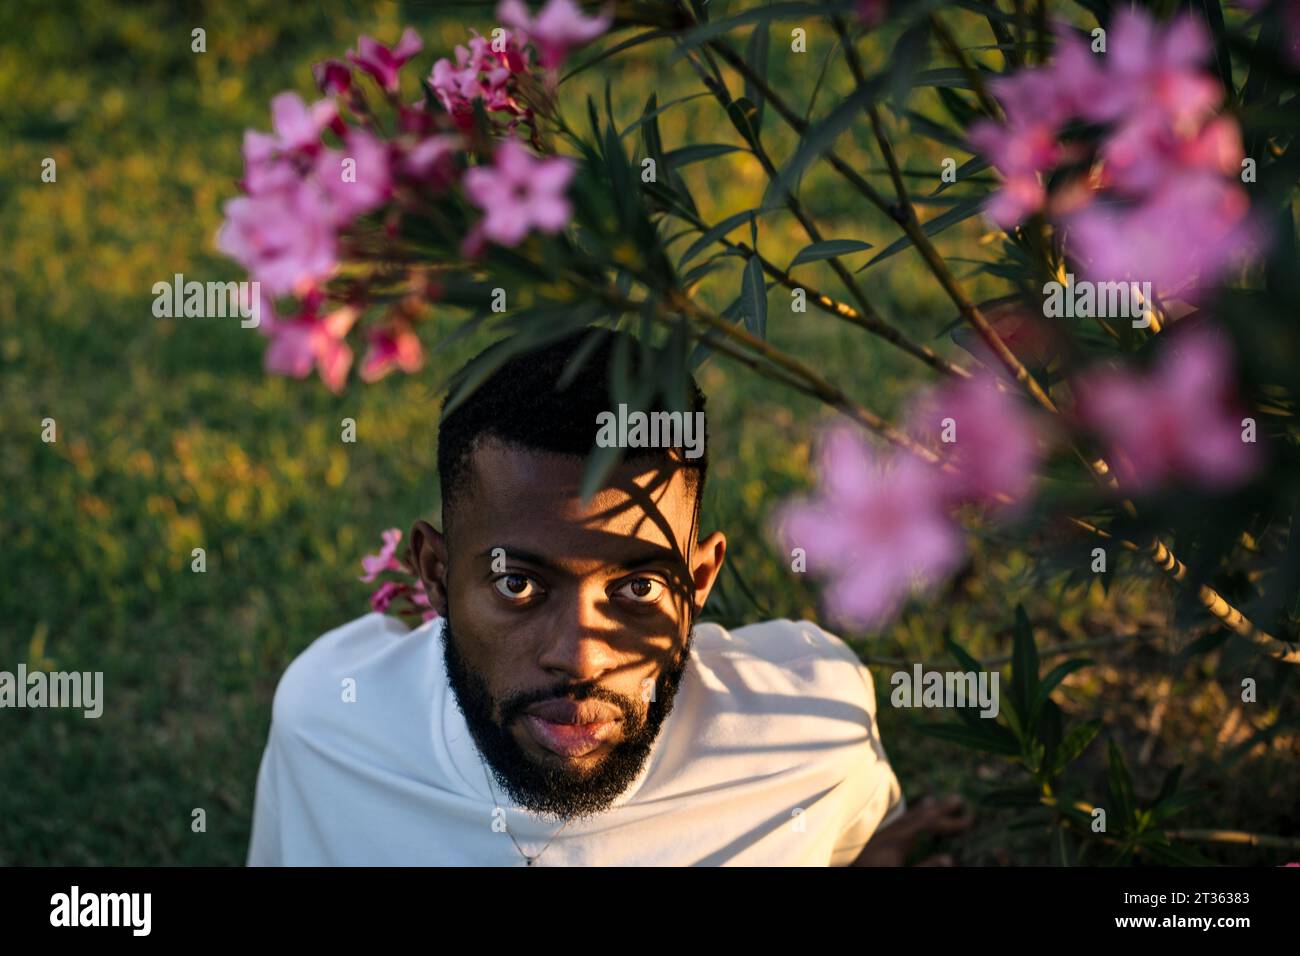 Young man under flowering plant in park Stock Photo